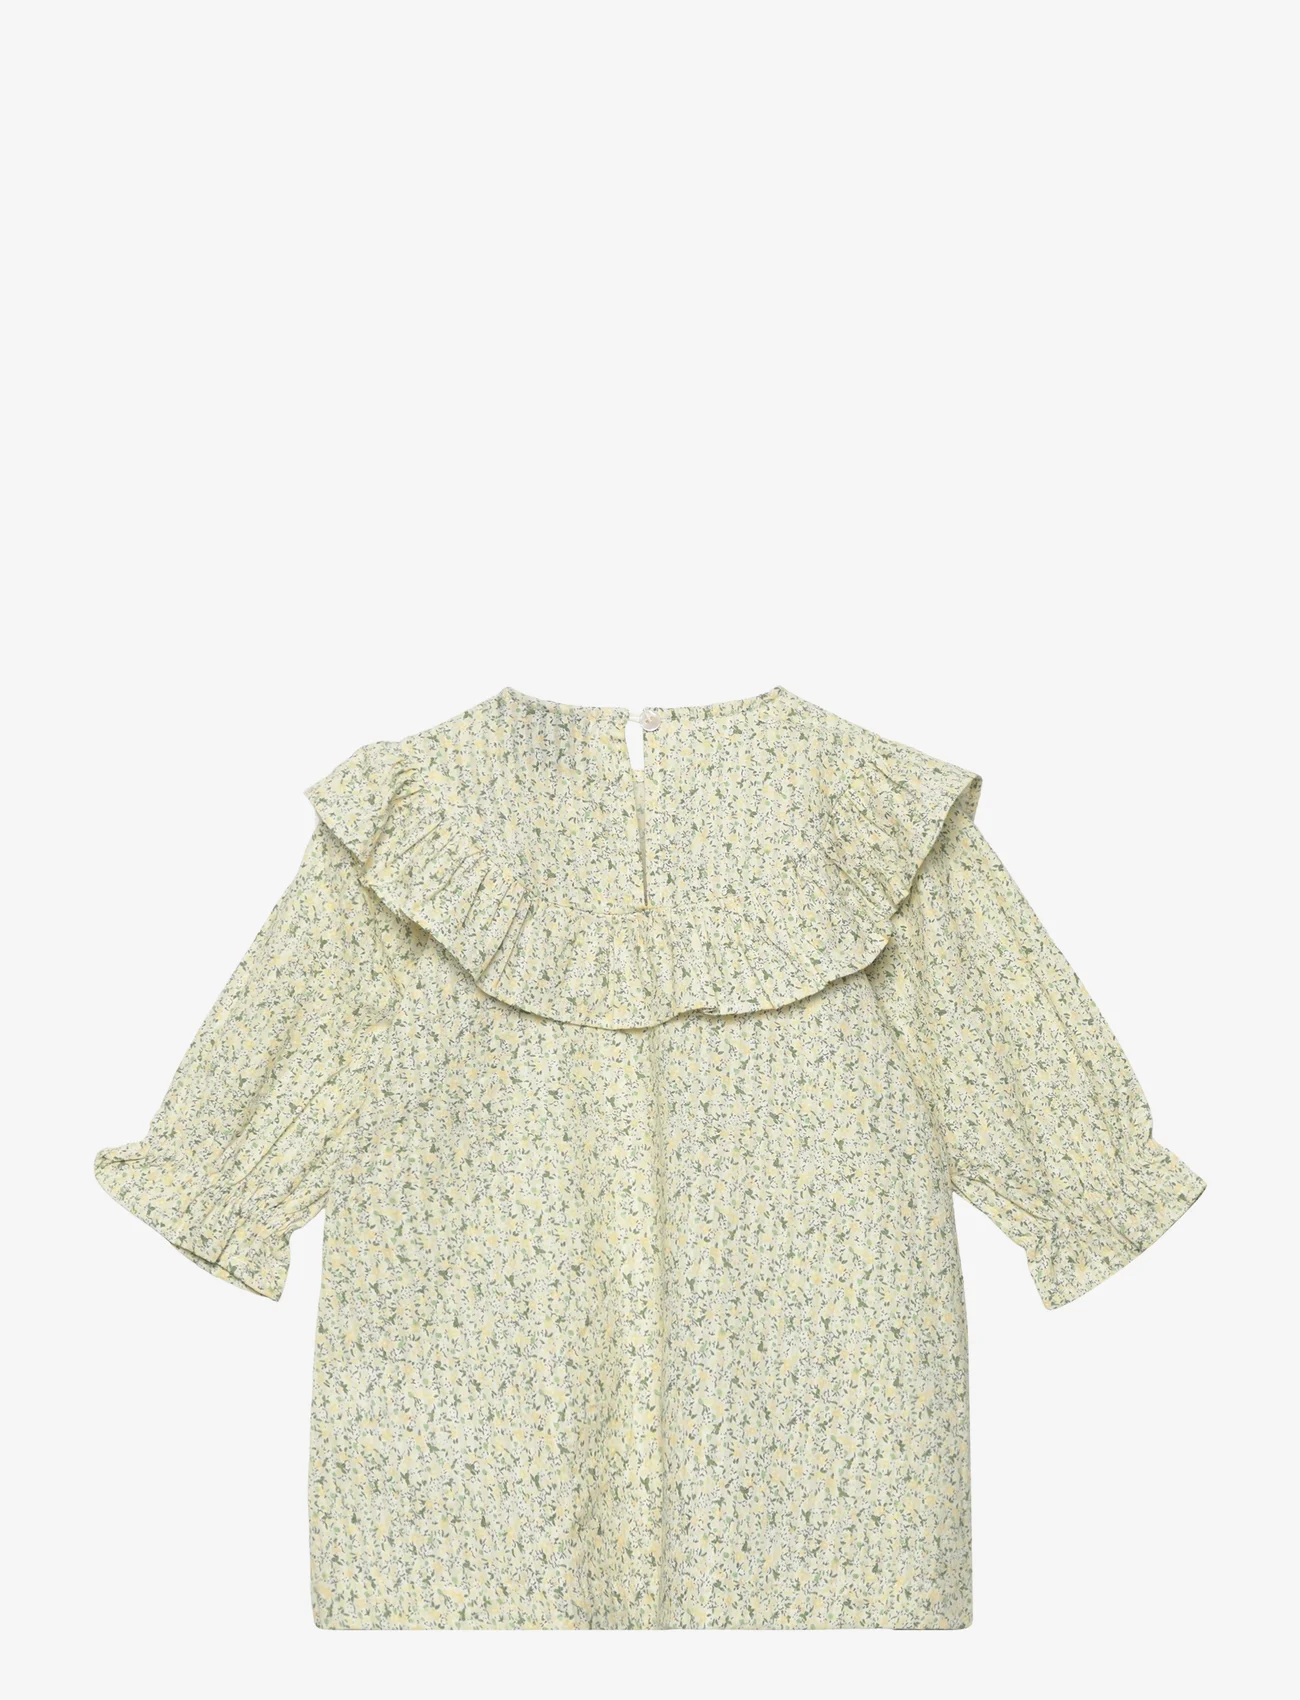 Sofie Schnoor Baby and Kids - Dress - sommarfynd - yellow flower - 1